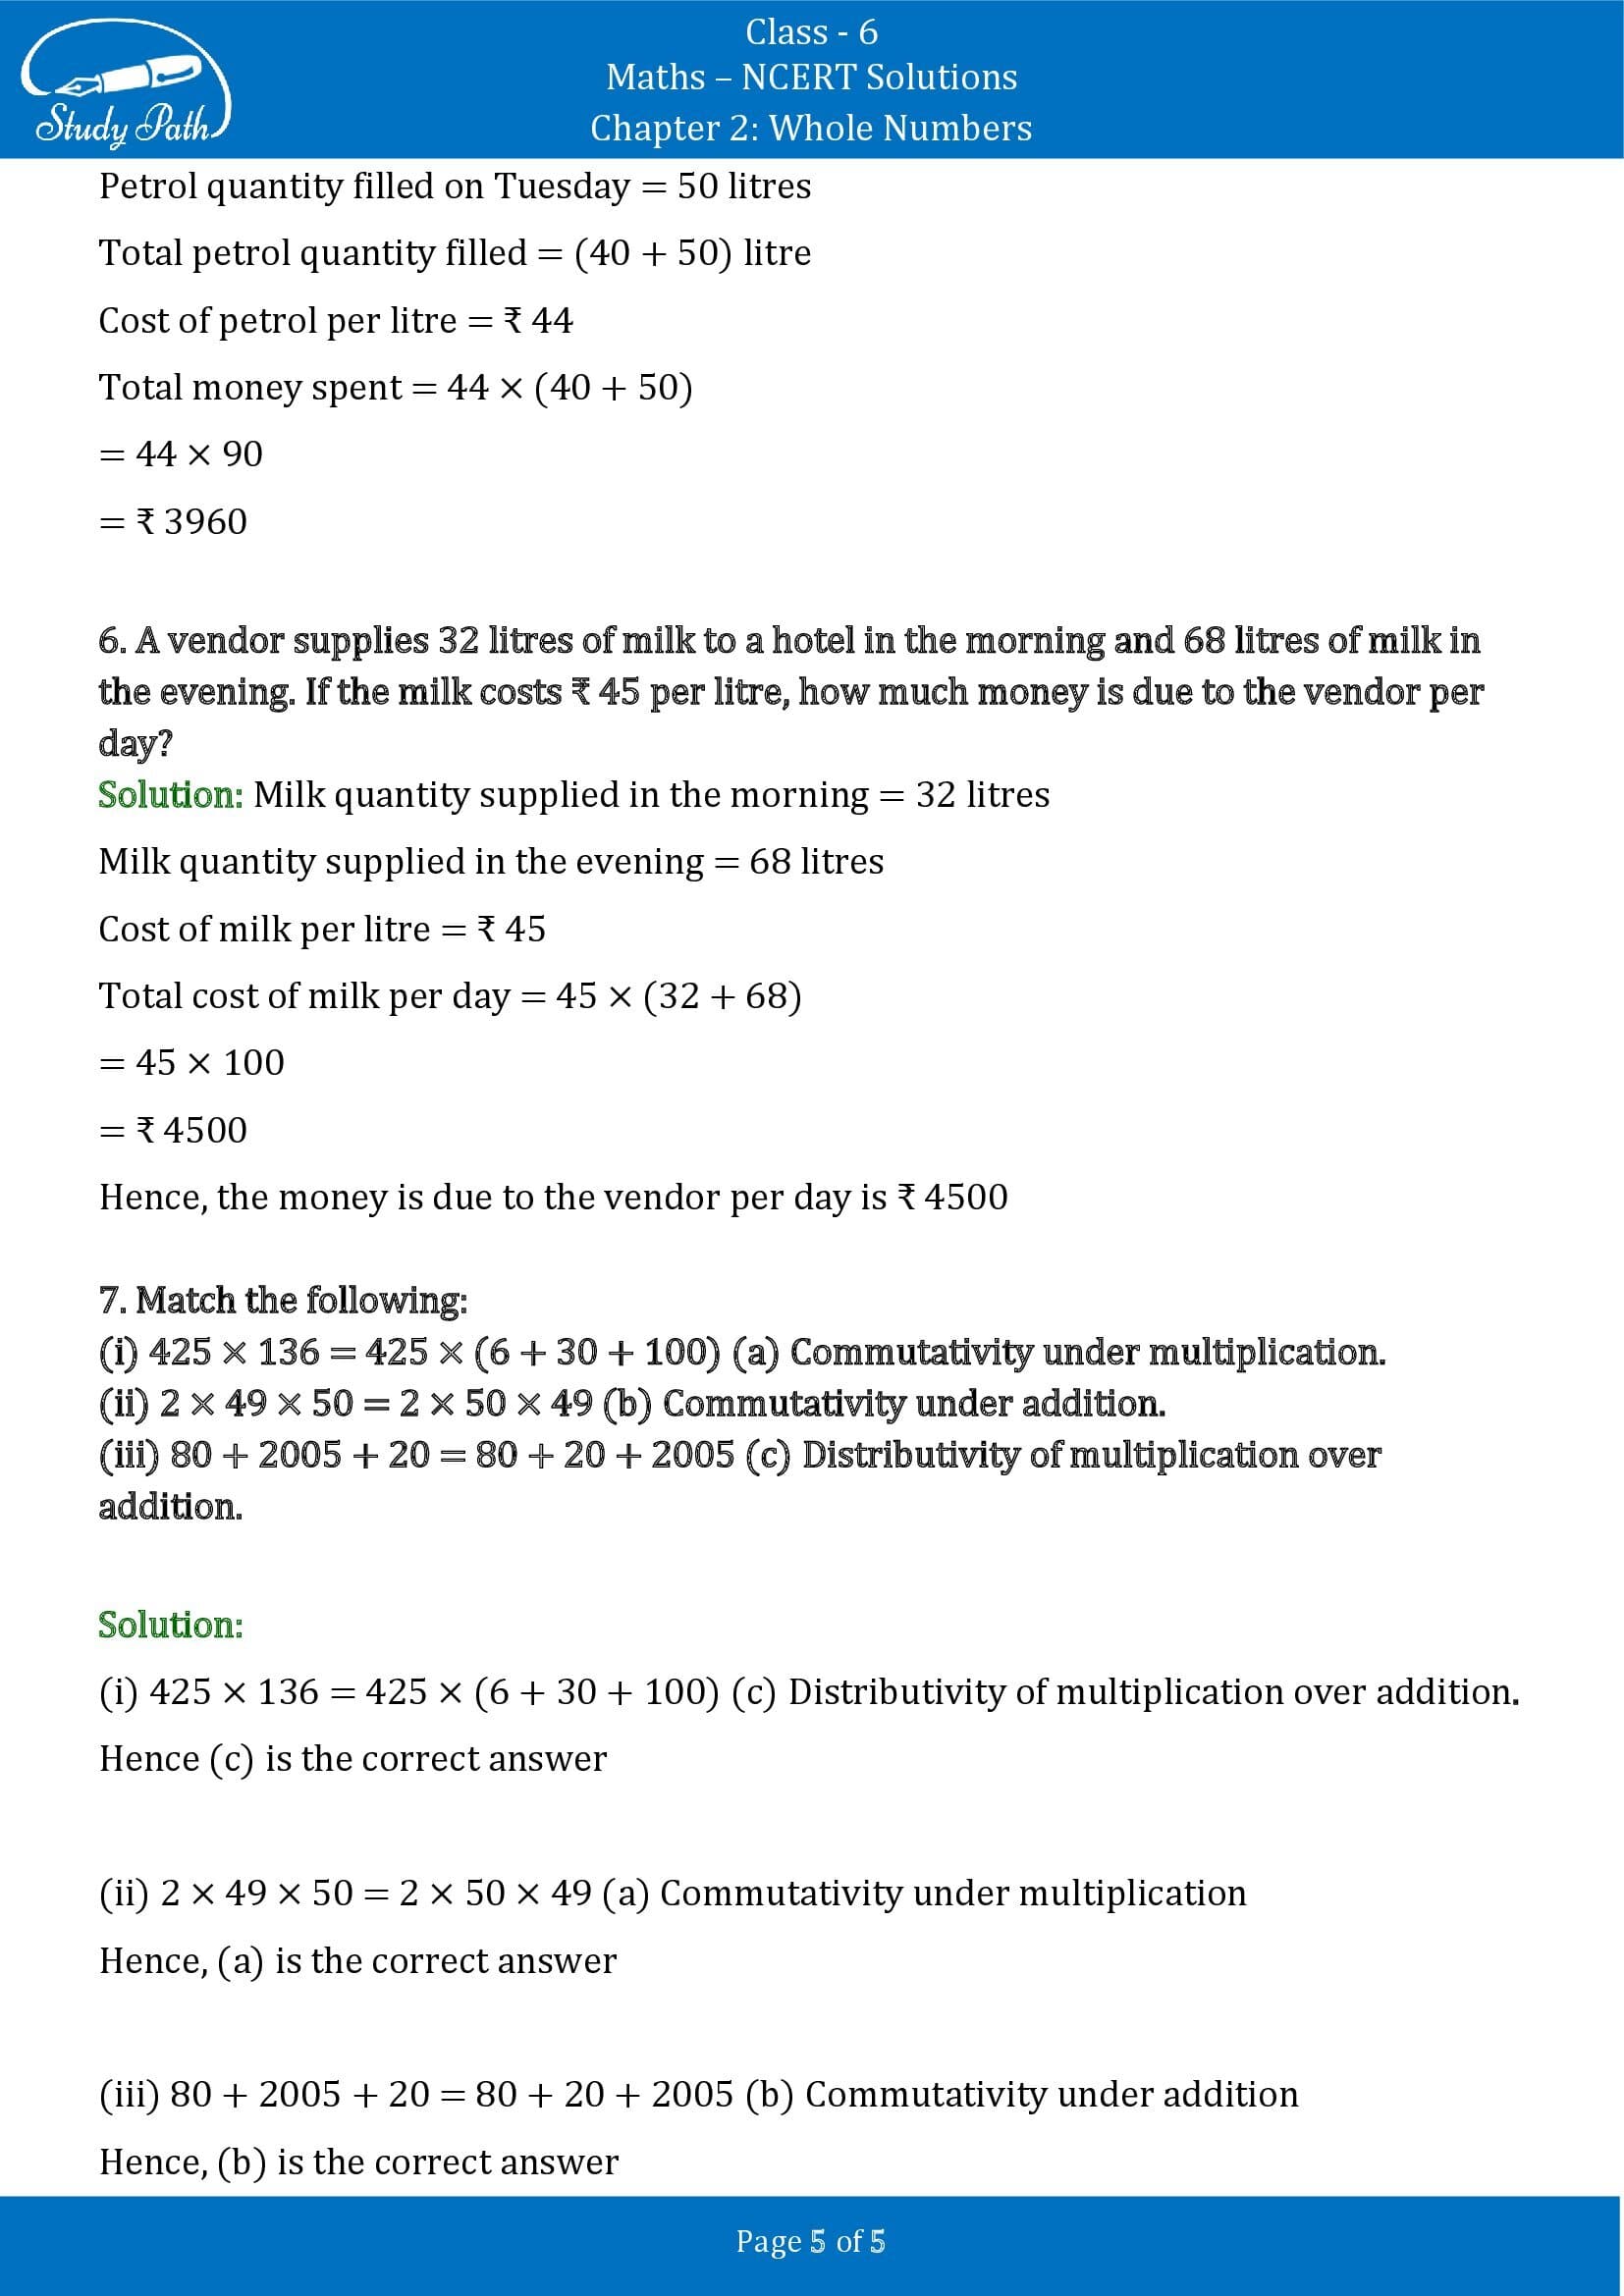 NCERT Solutions for Class 6 Maths Chapter 2 Whole Numbers Exercise 2.2 00005